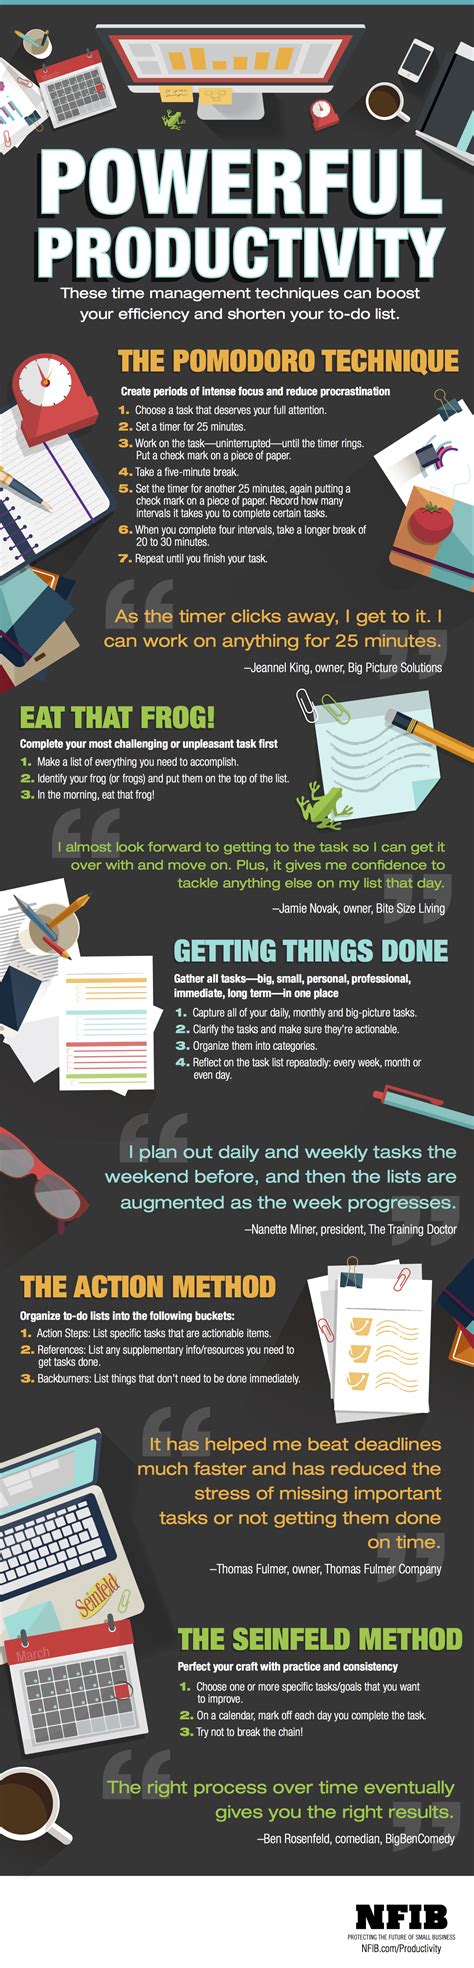 5 Ways To Be More Productive